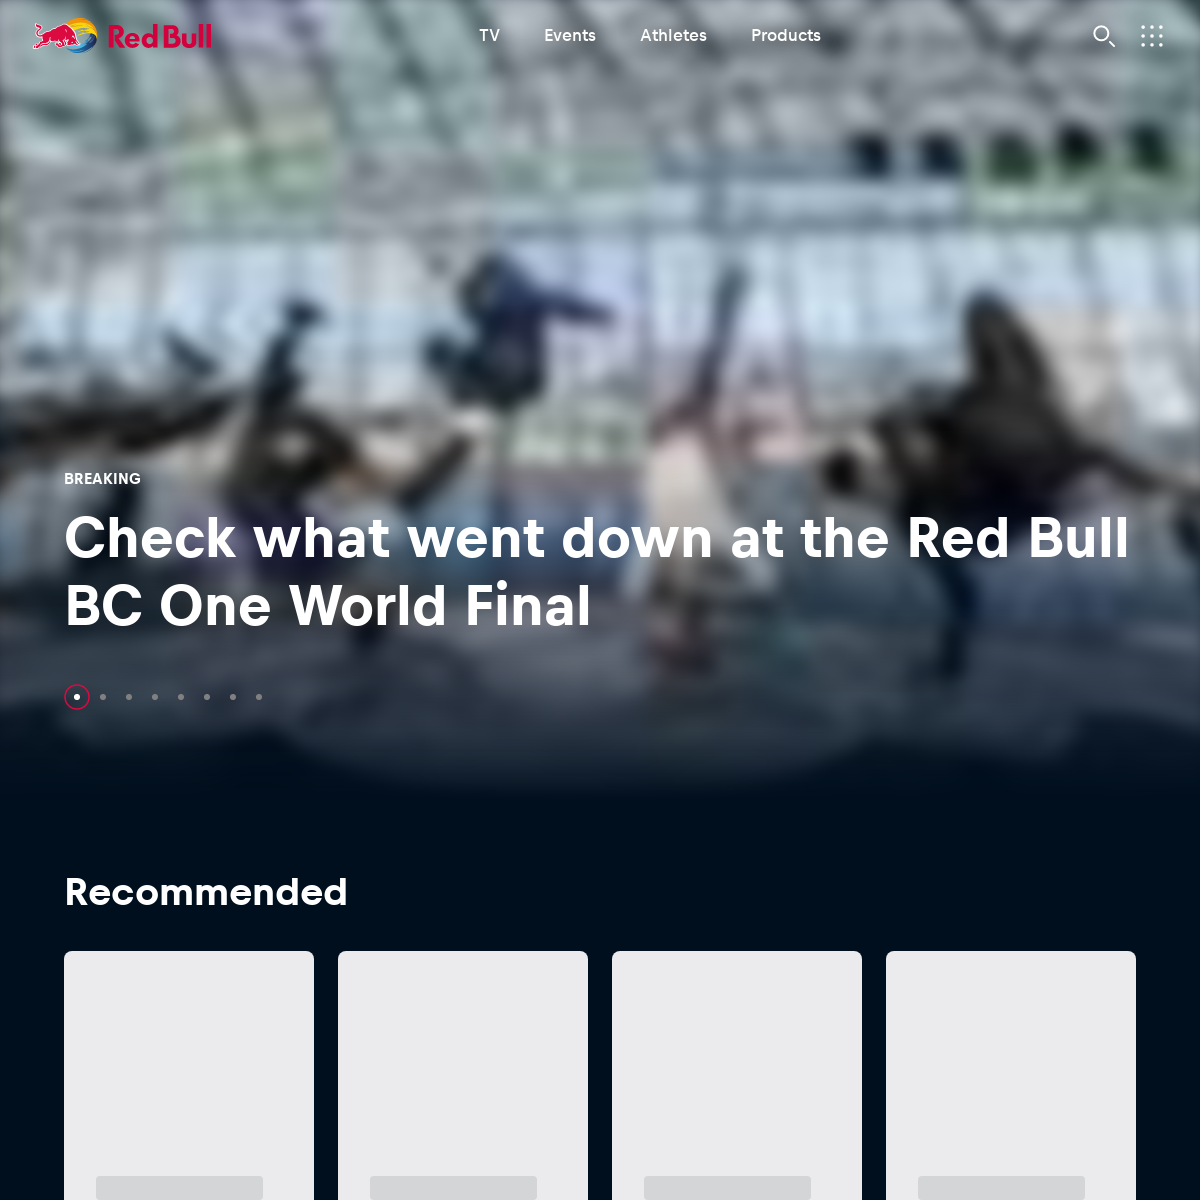 A complete backup of redbull.tv